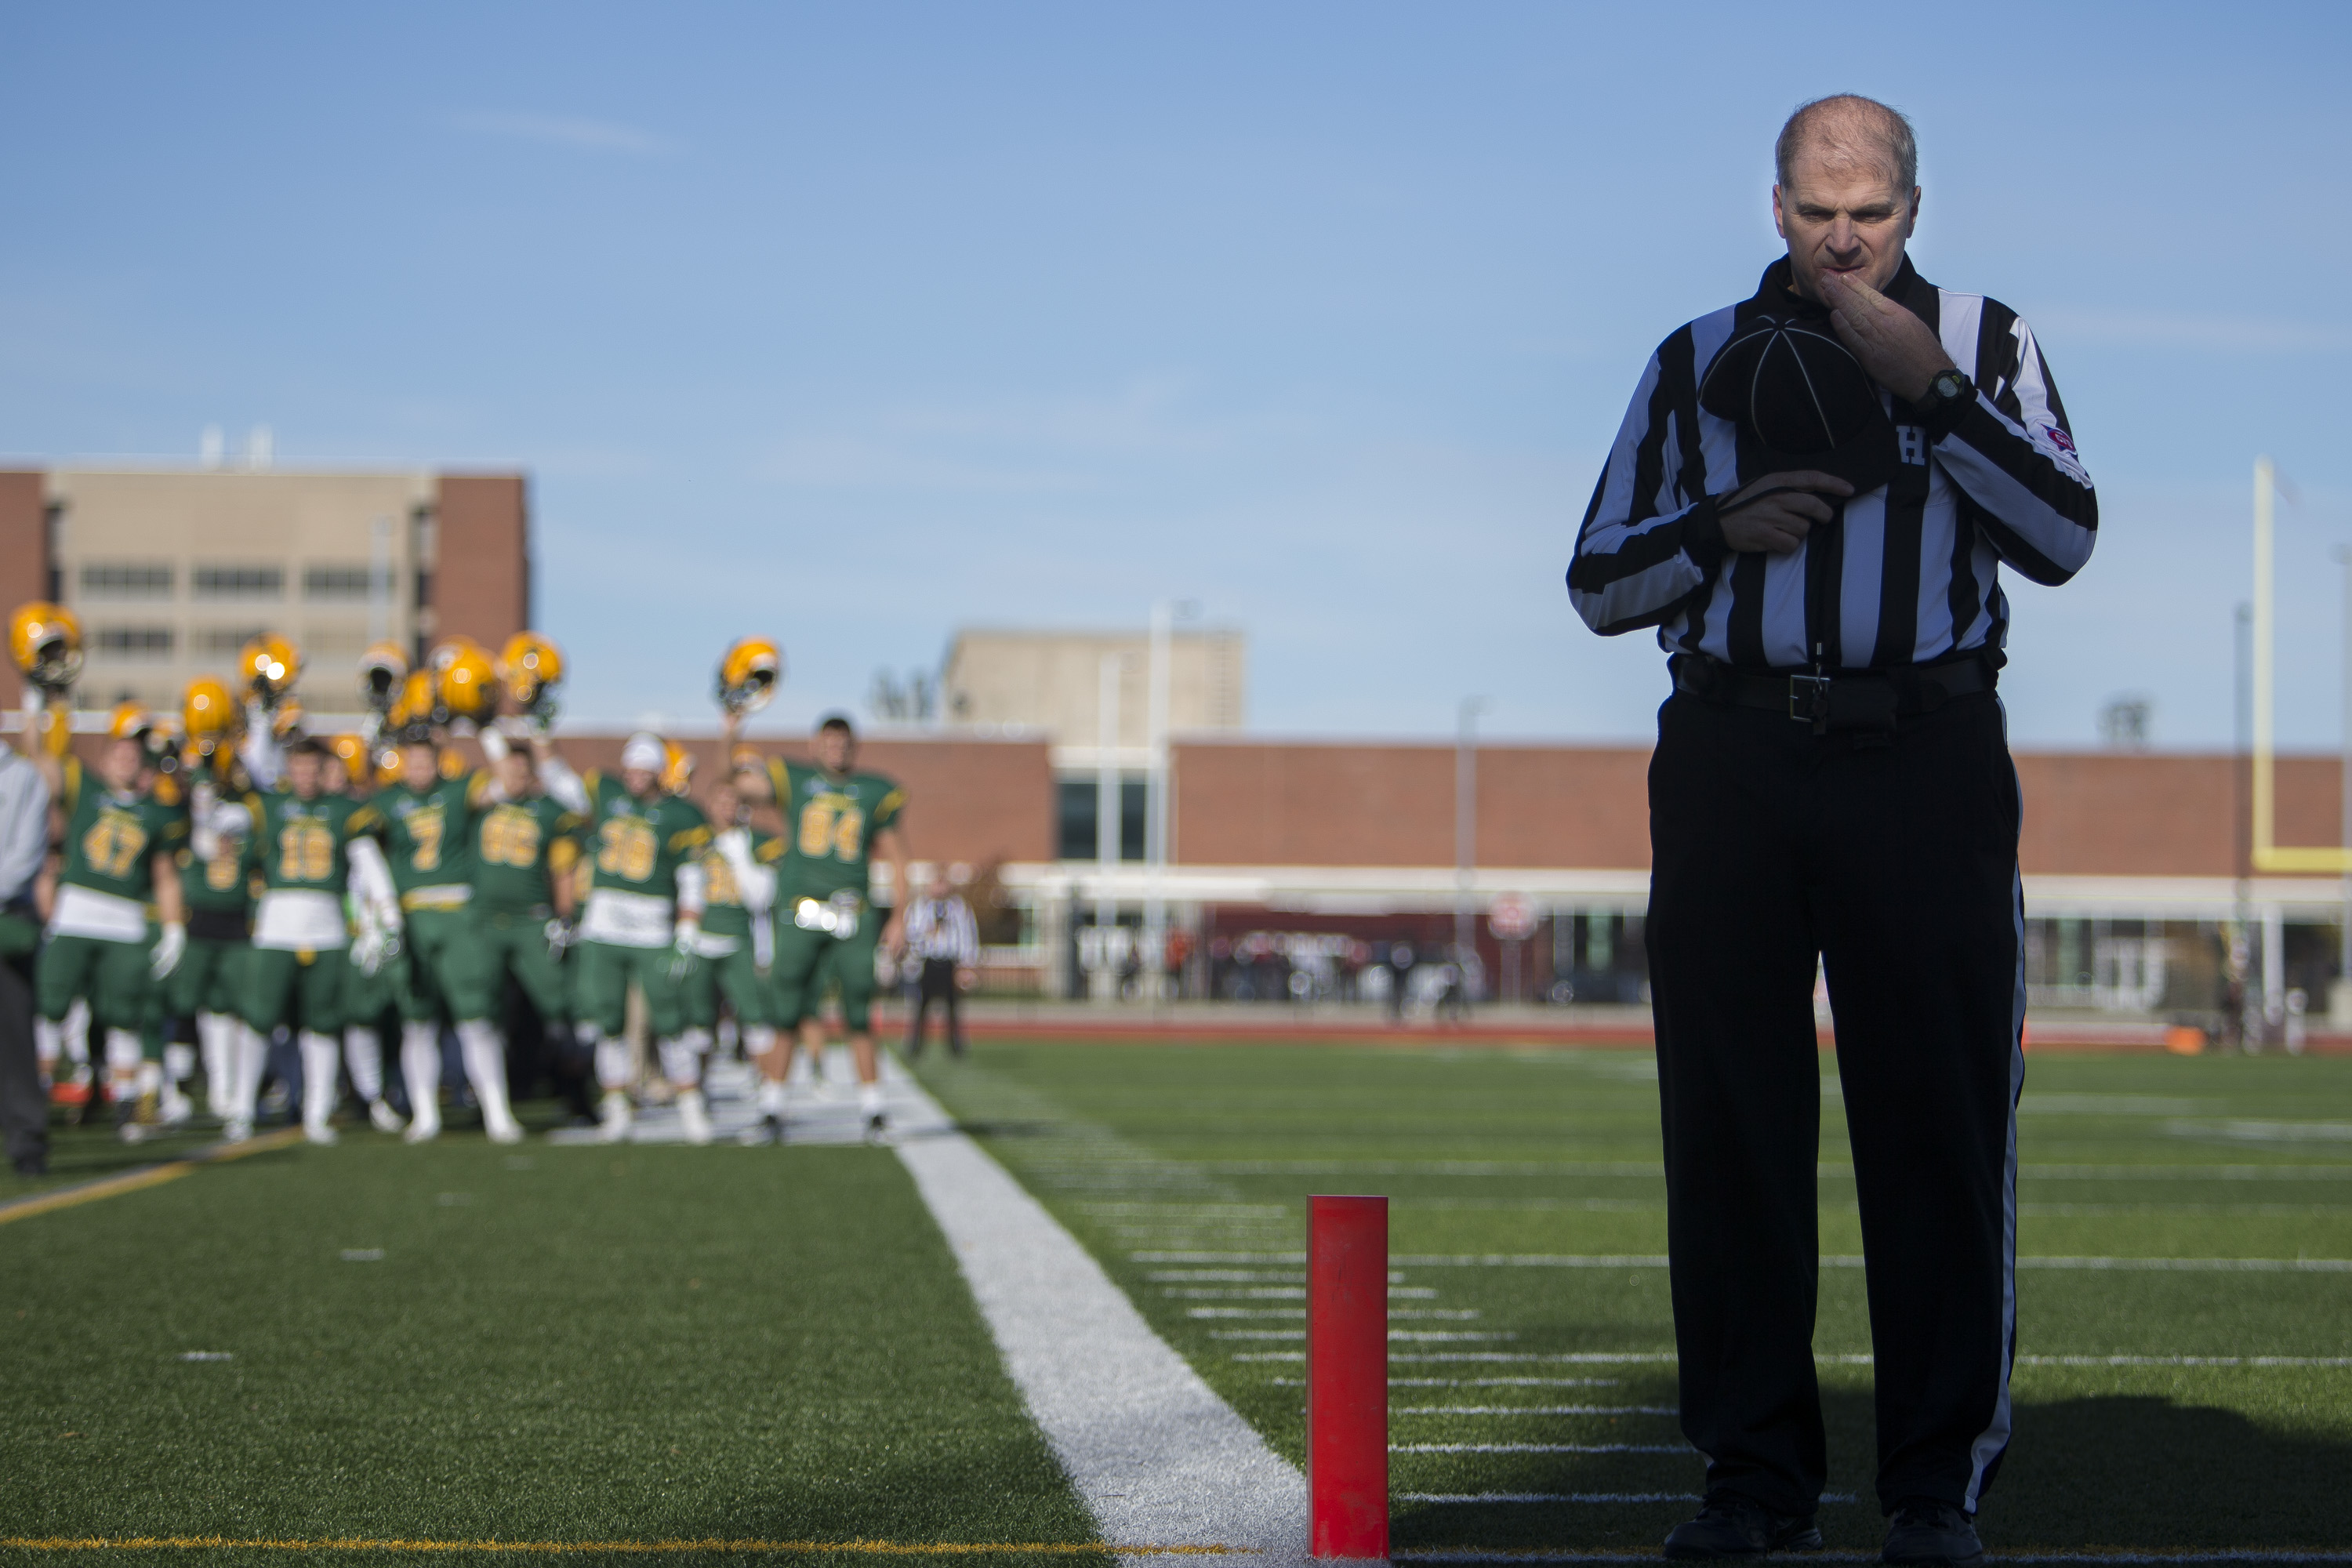 Referee Steve Campbell stands in the end zone for the National Anthem at the Bob Boozer Field on the college of Brockport campus in Brockport, N.Y. on Nov. 12, 2016.